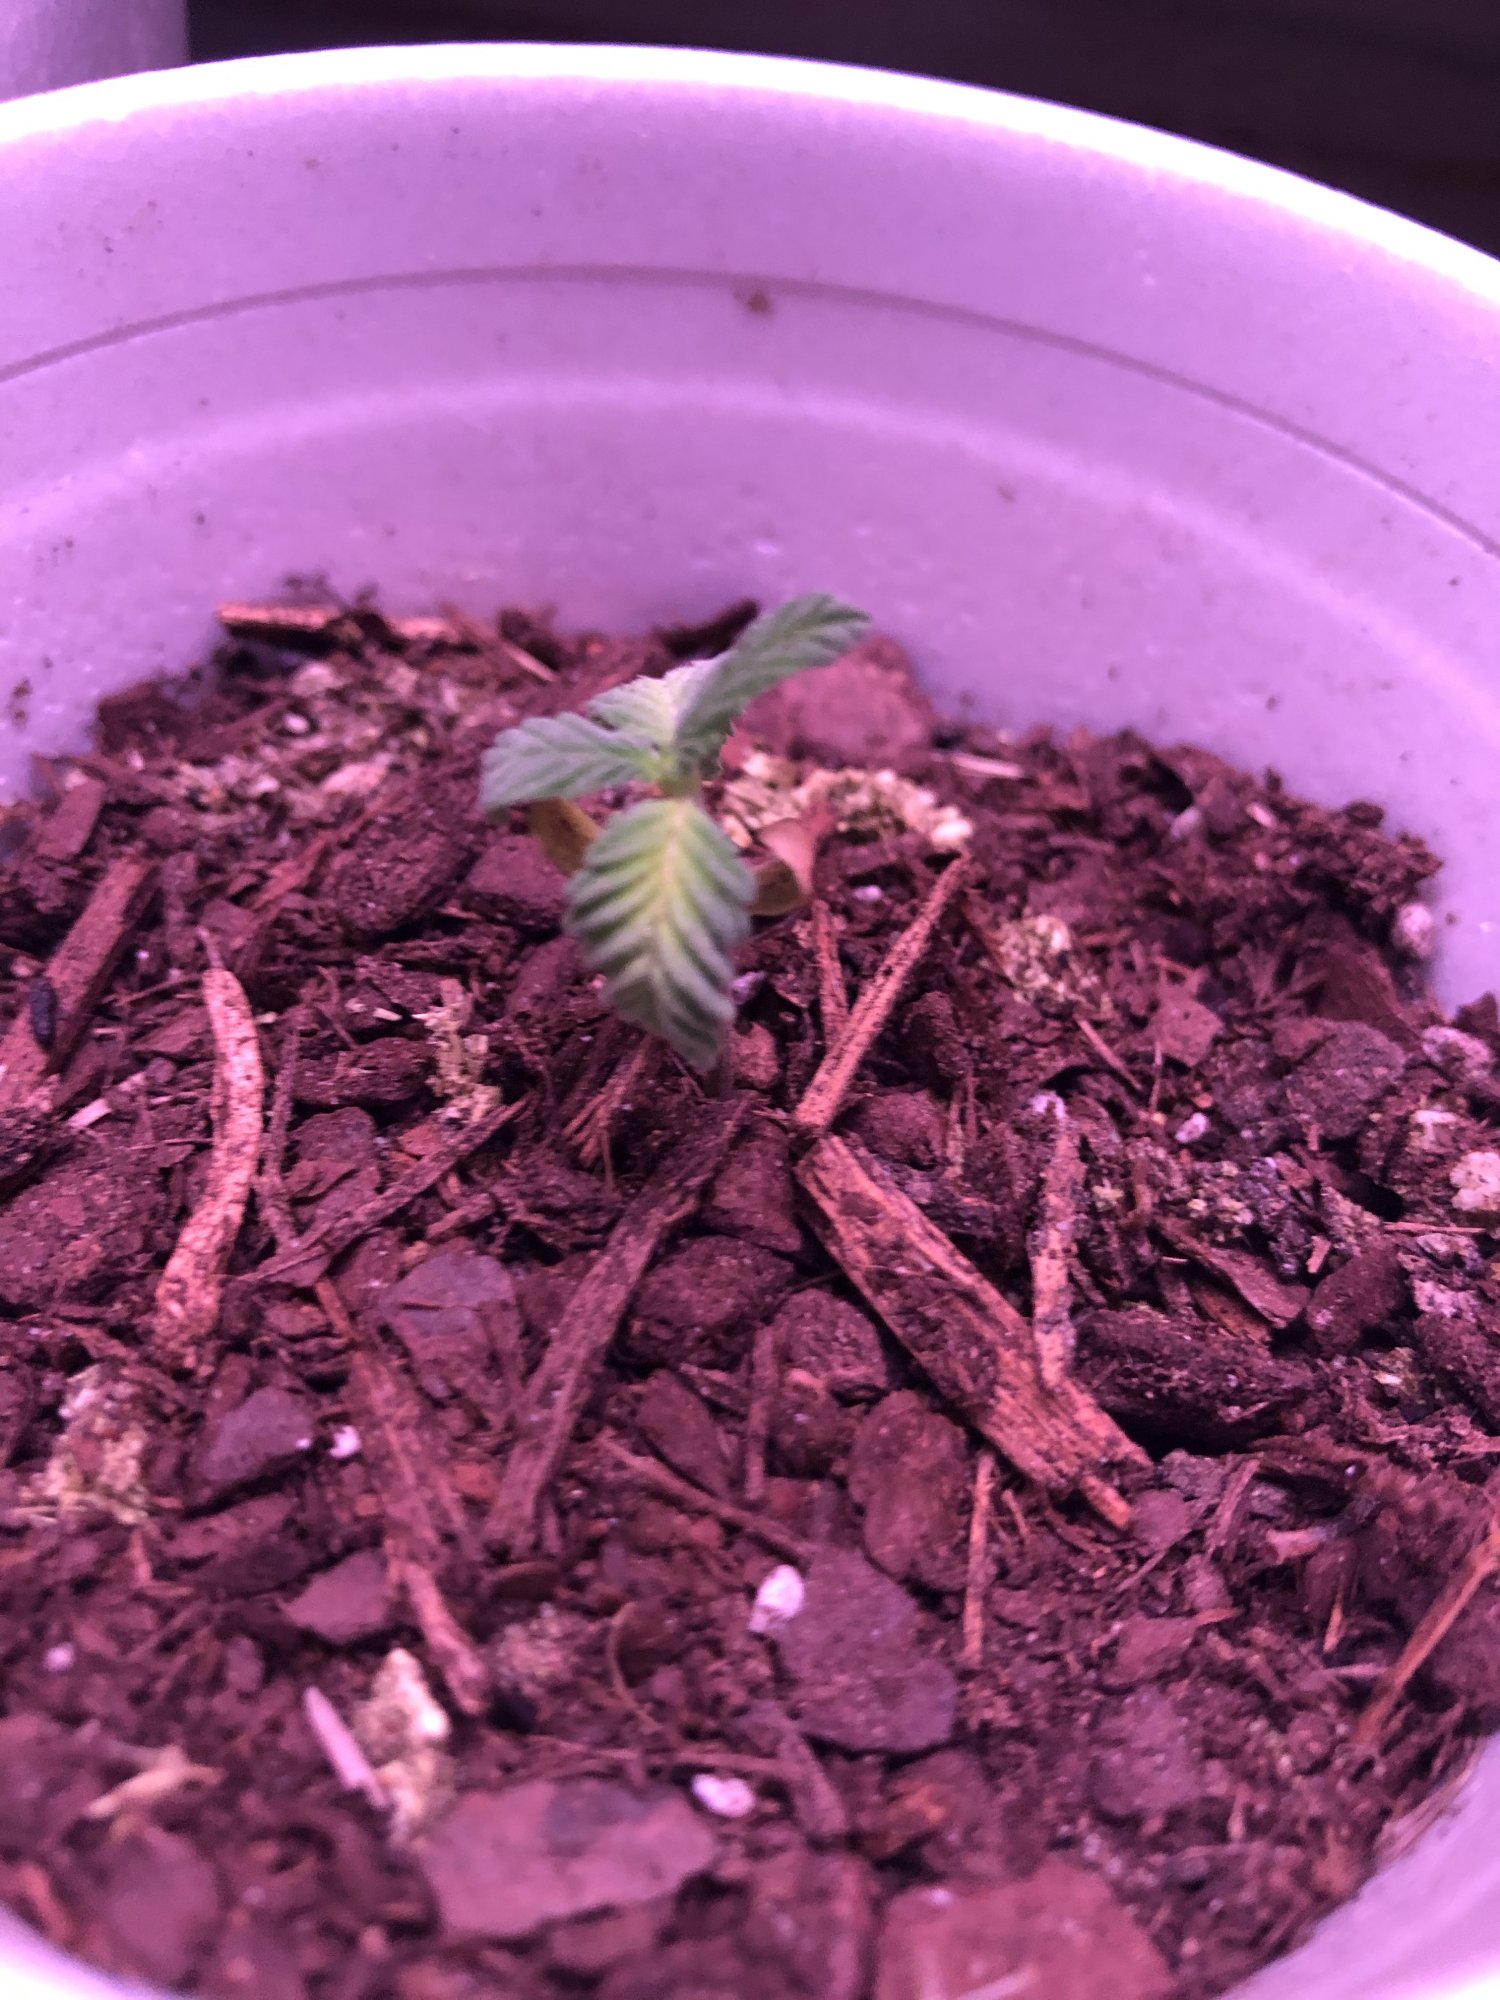 Droopy seedling 2